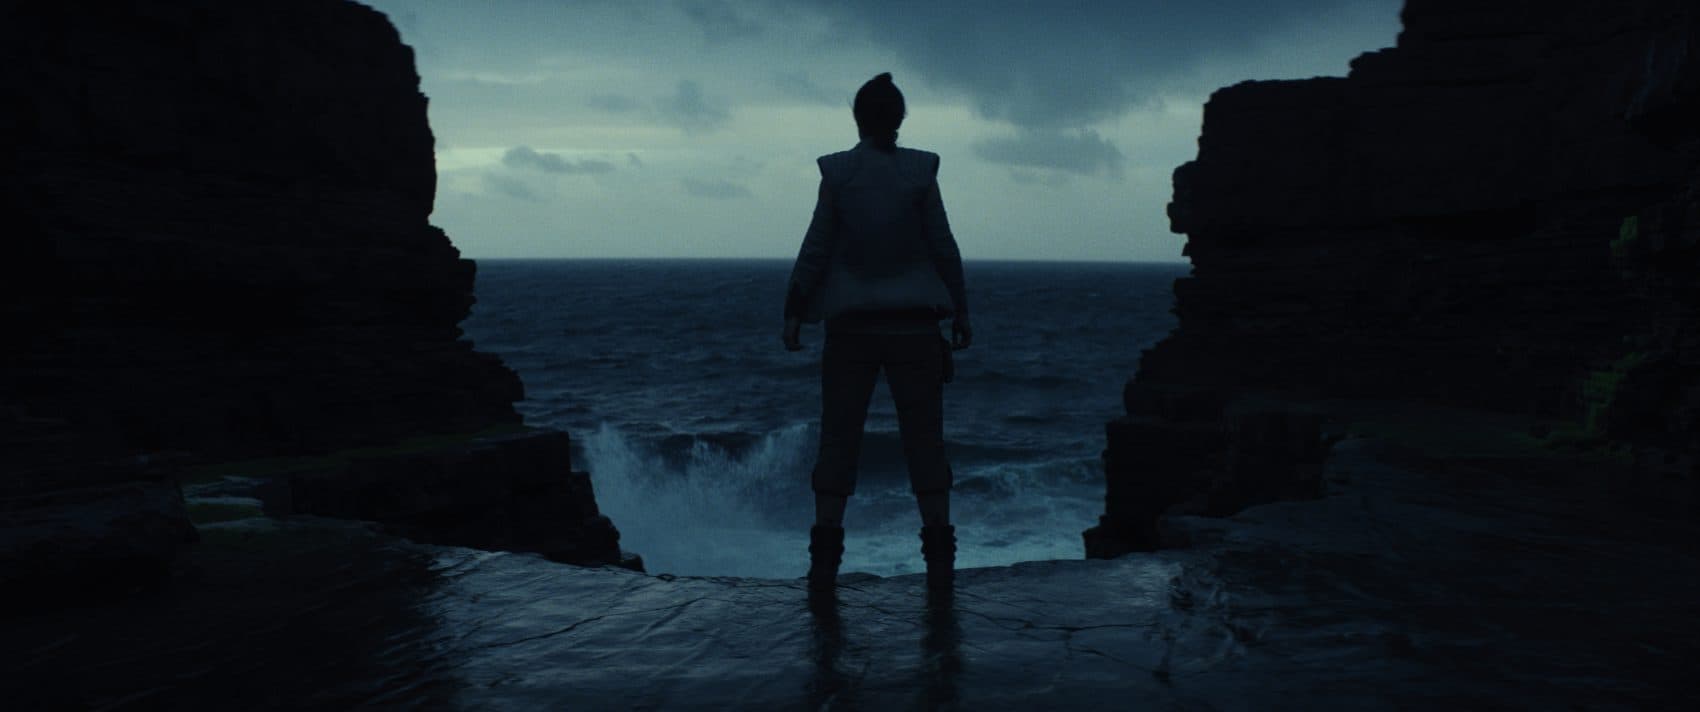 A still from &quot;Star Wars: The Last Jedi.&quot; (Courtesy Film Frames Industrial Light & Magic/Lucasfilm)